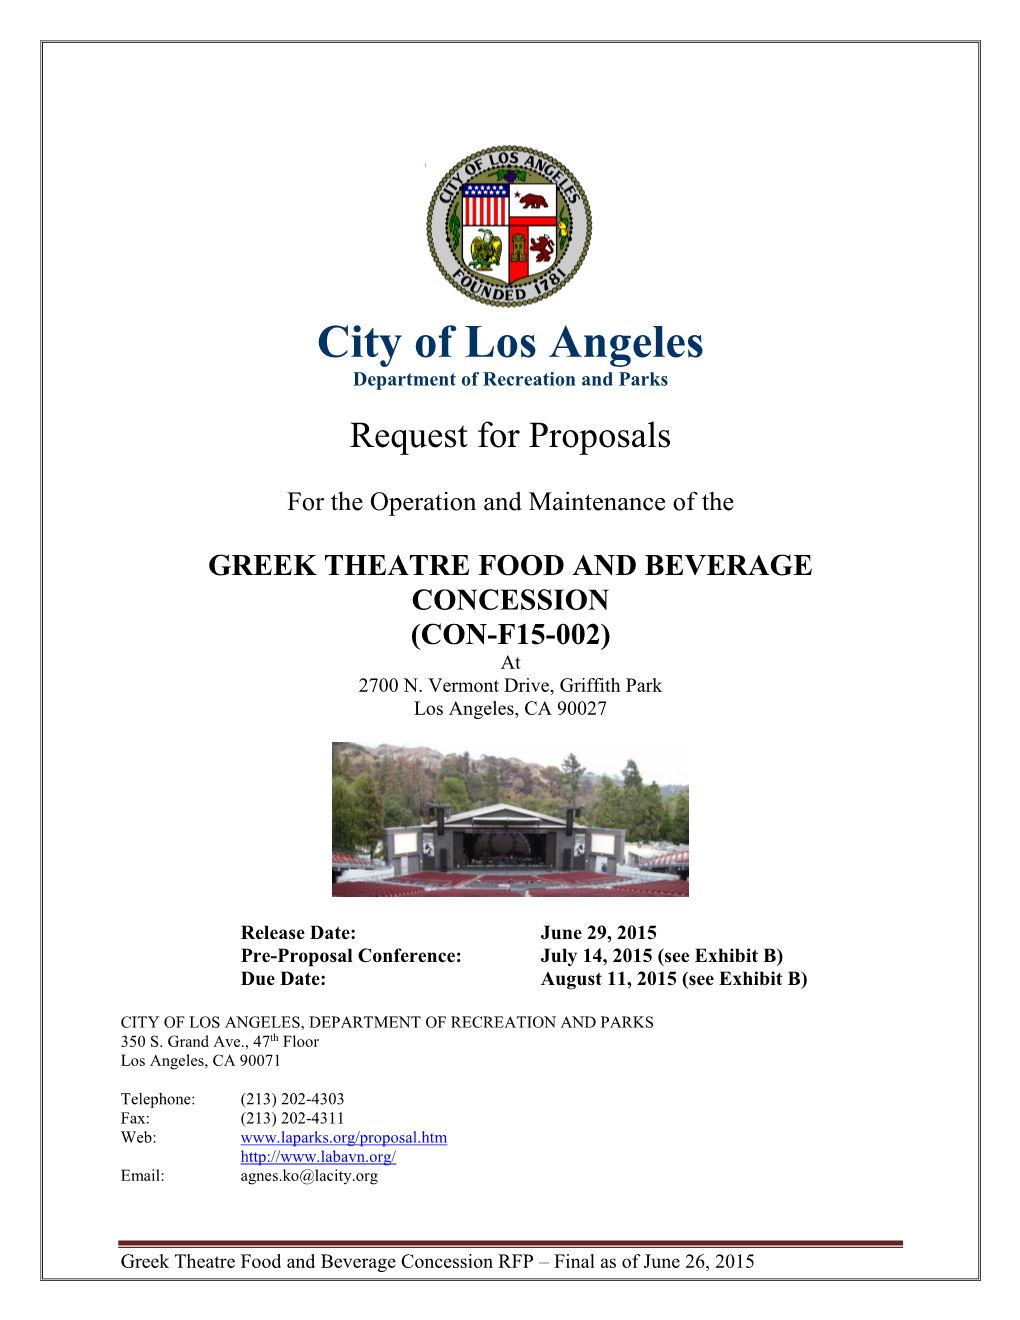 GREEK THEATRE FOOD and BEVERAGE CONCESSION (CON-F15-002) at 2700 N